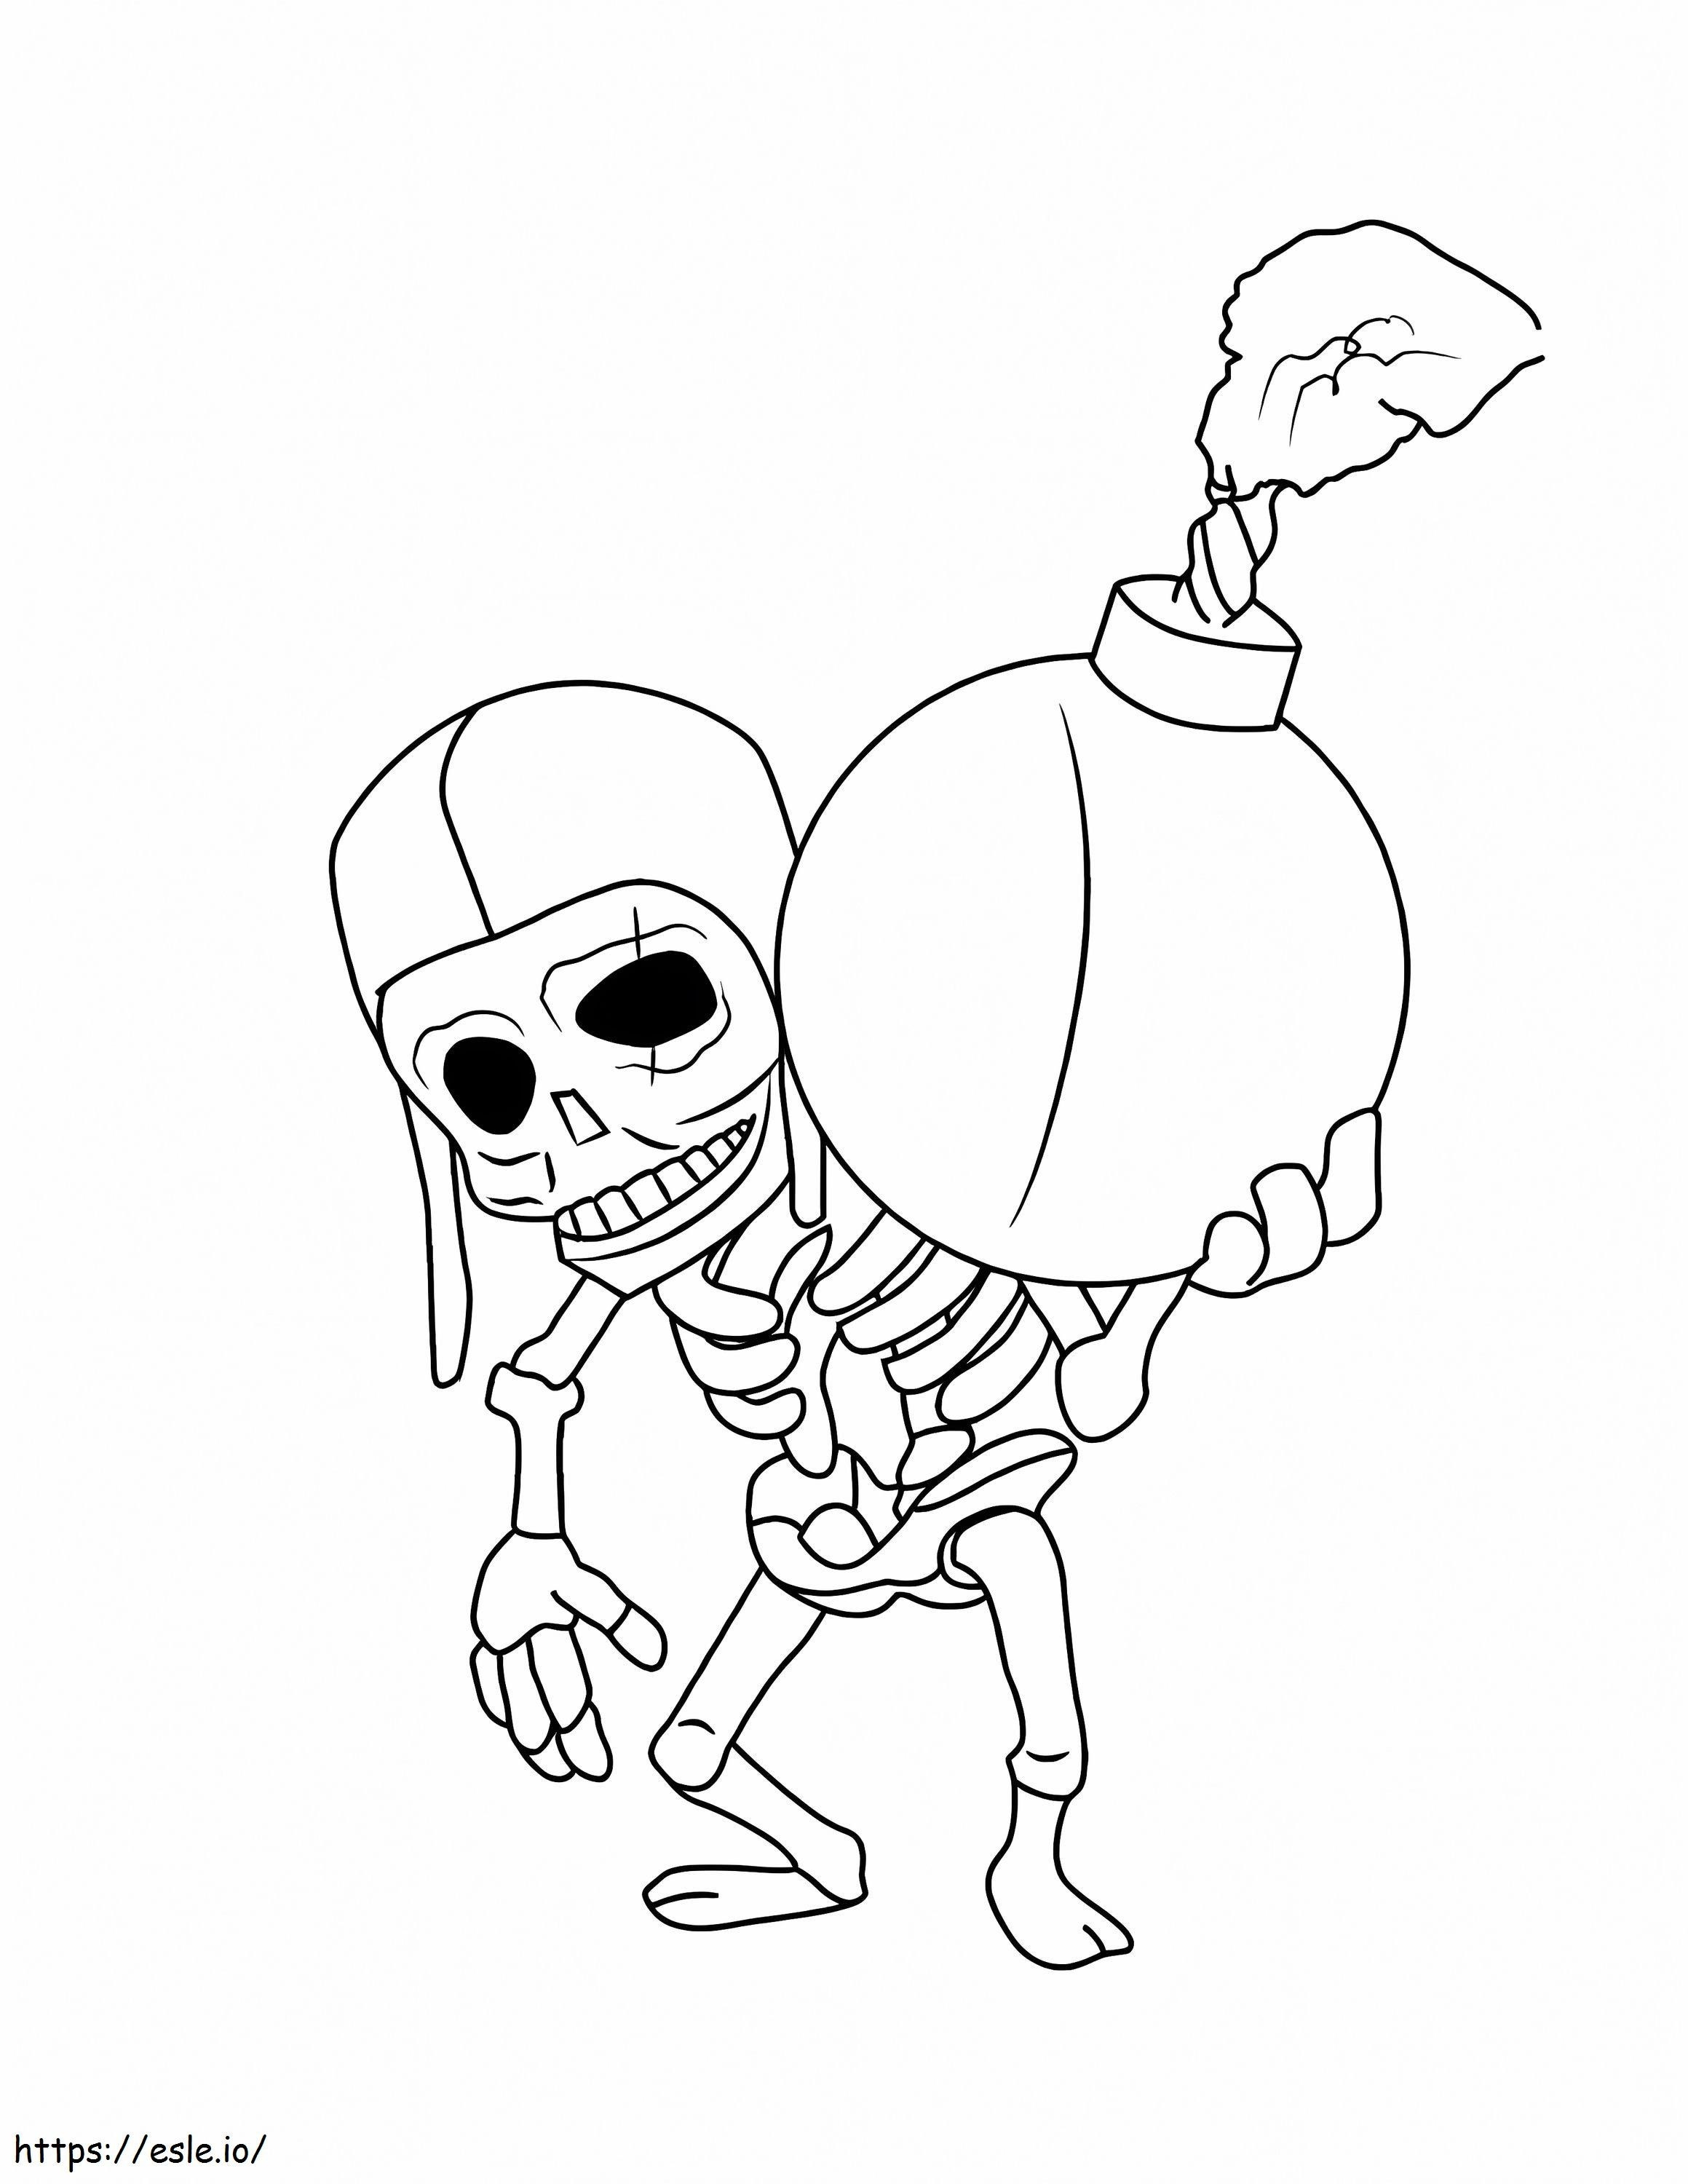 Skeleton With Bomb coloring page